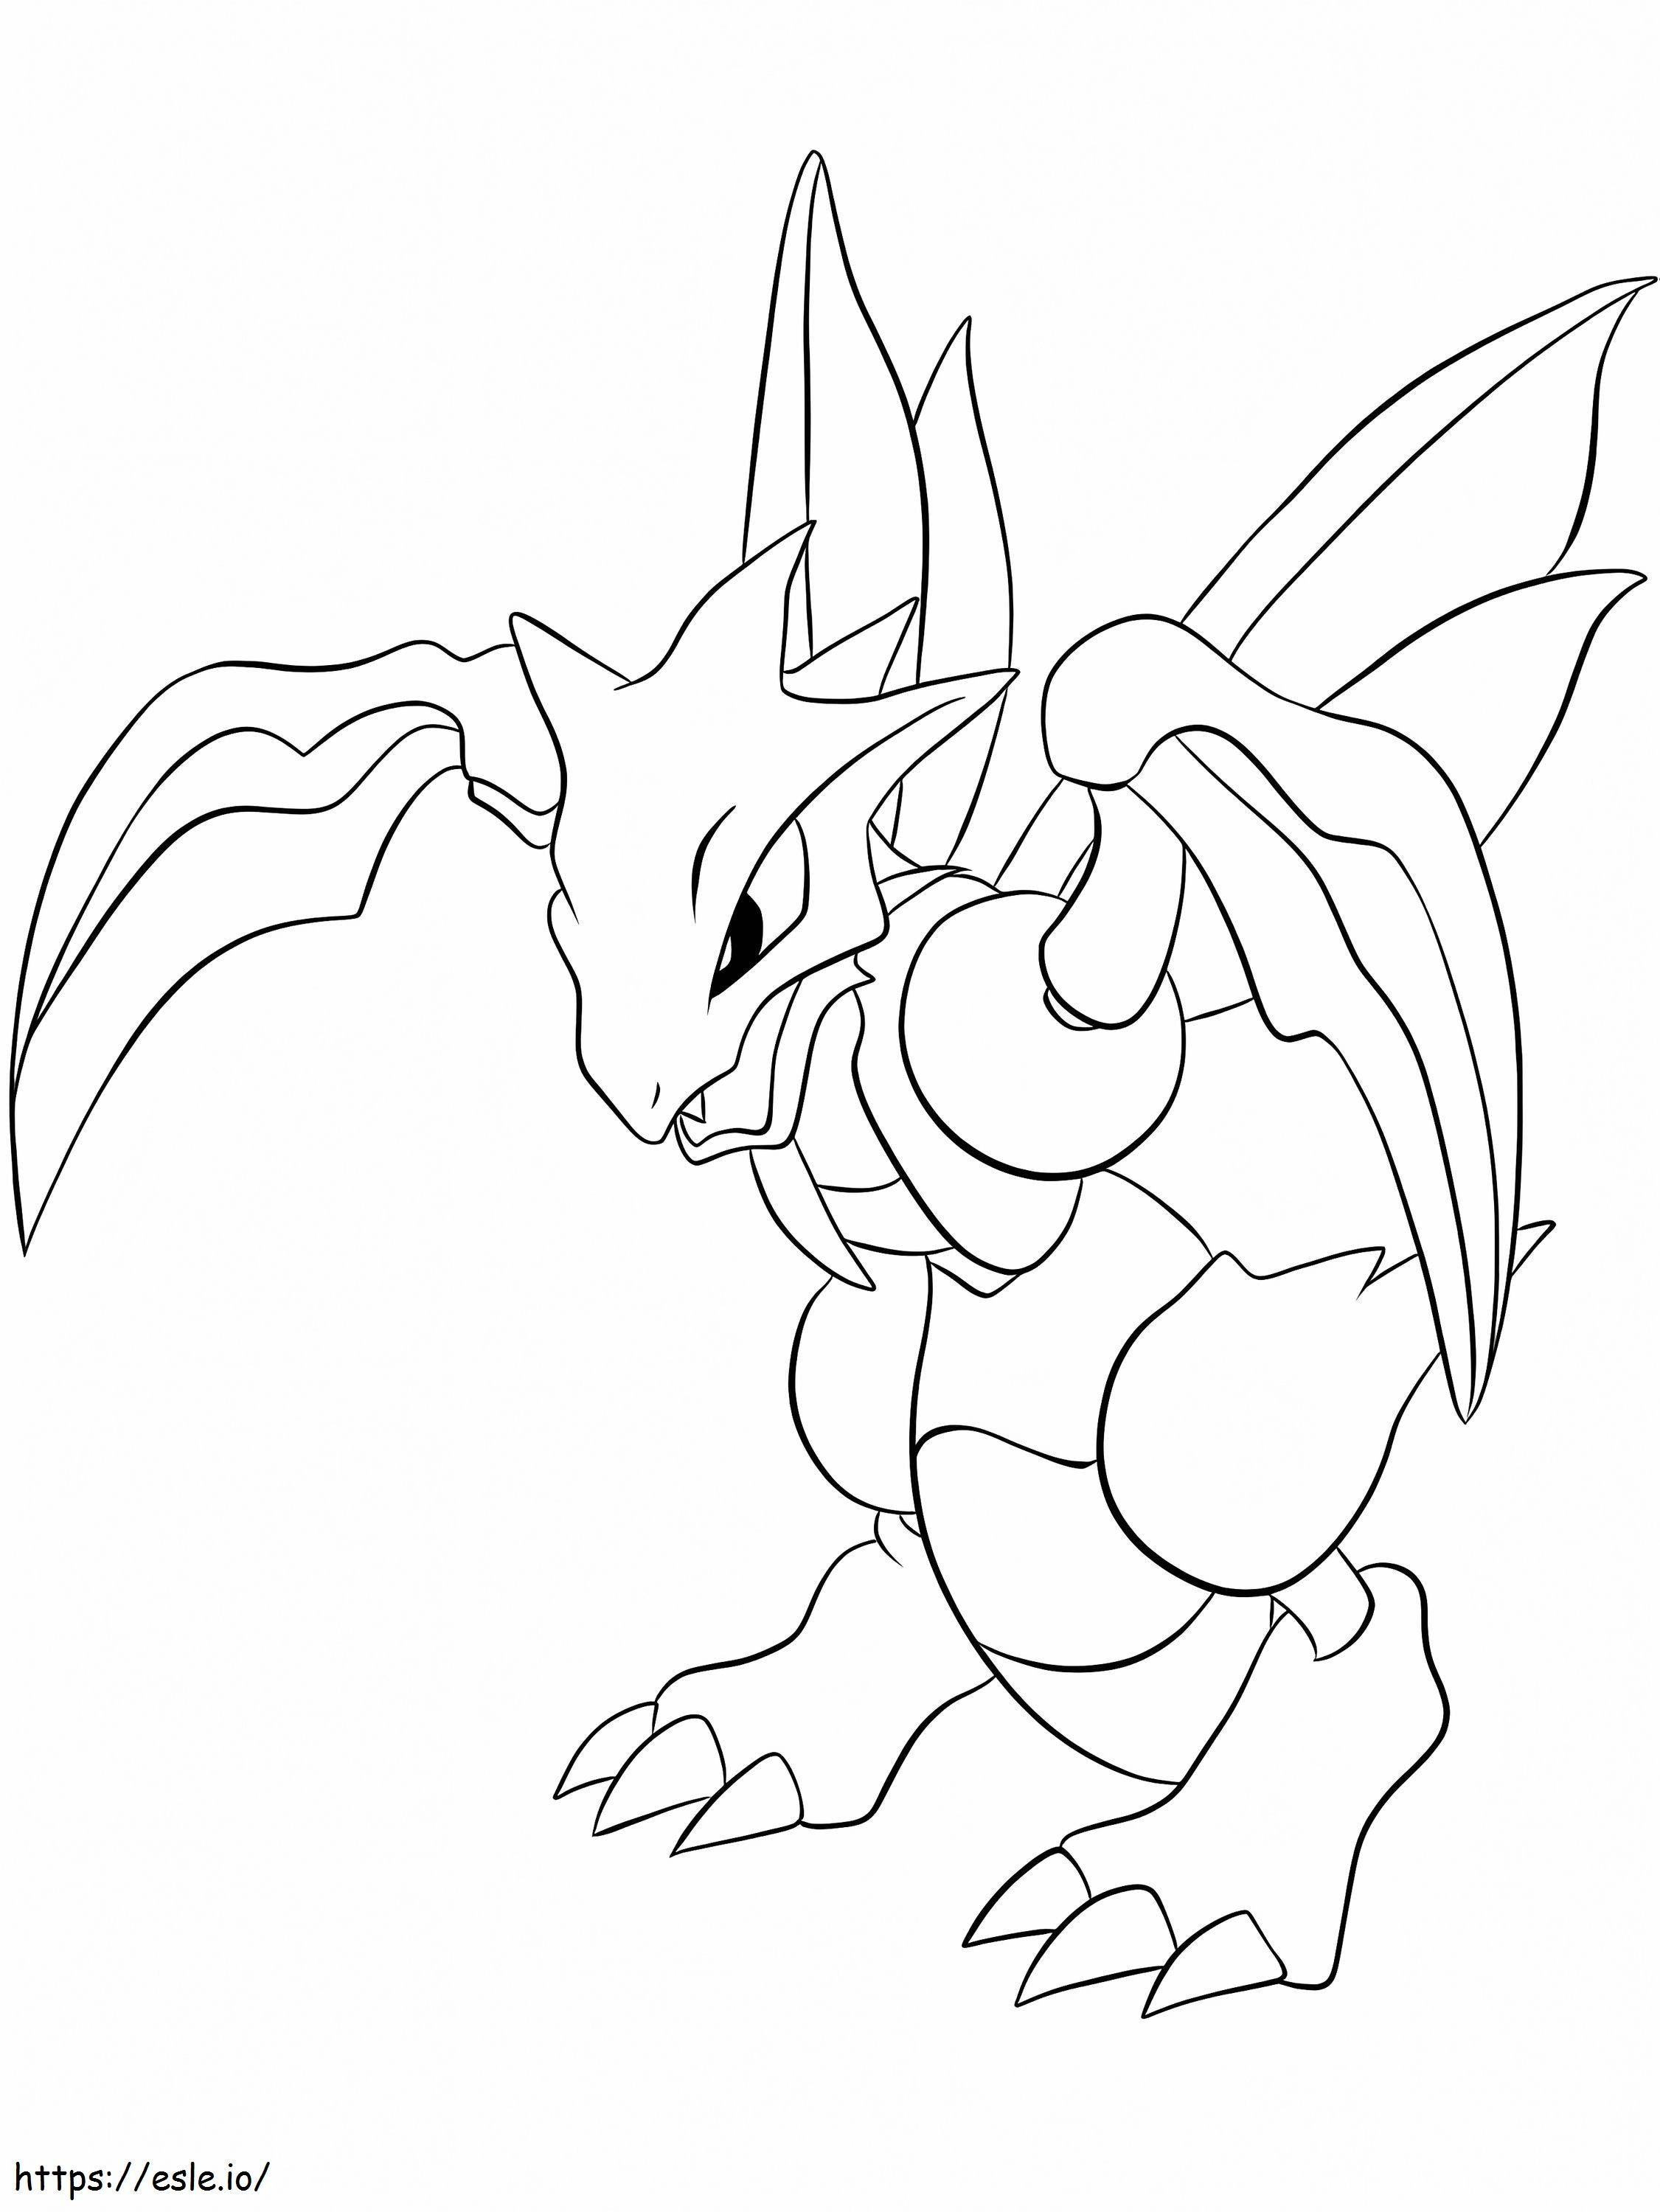 Printable Scyther coloring page